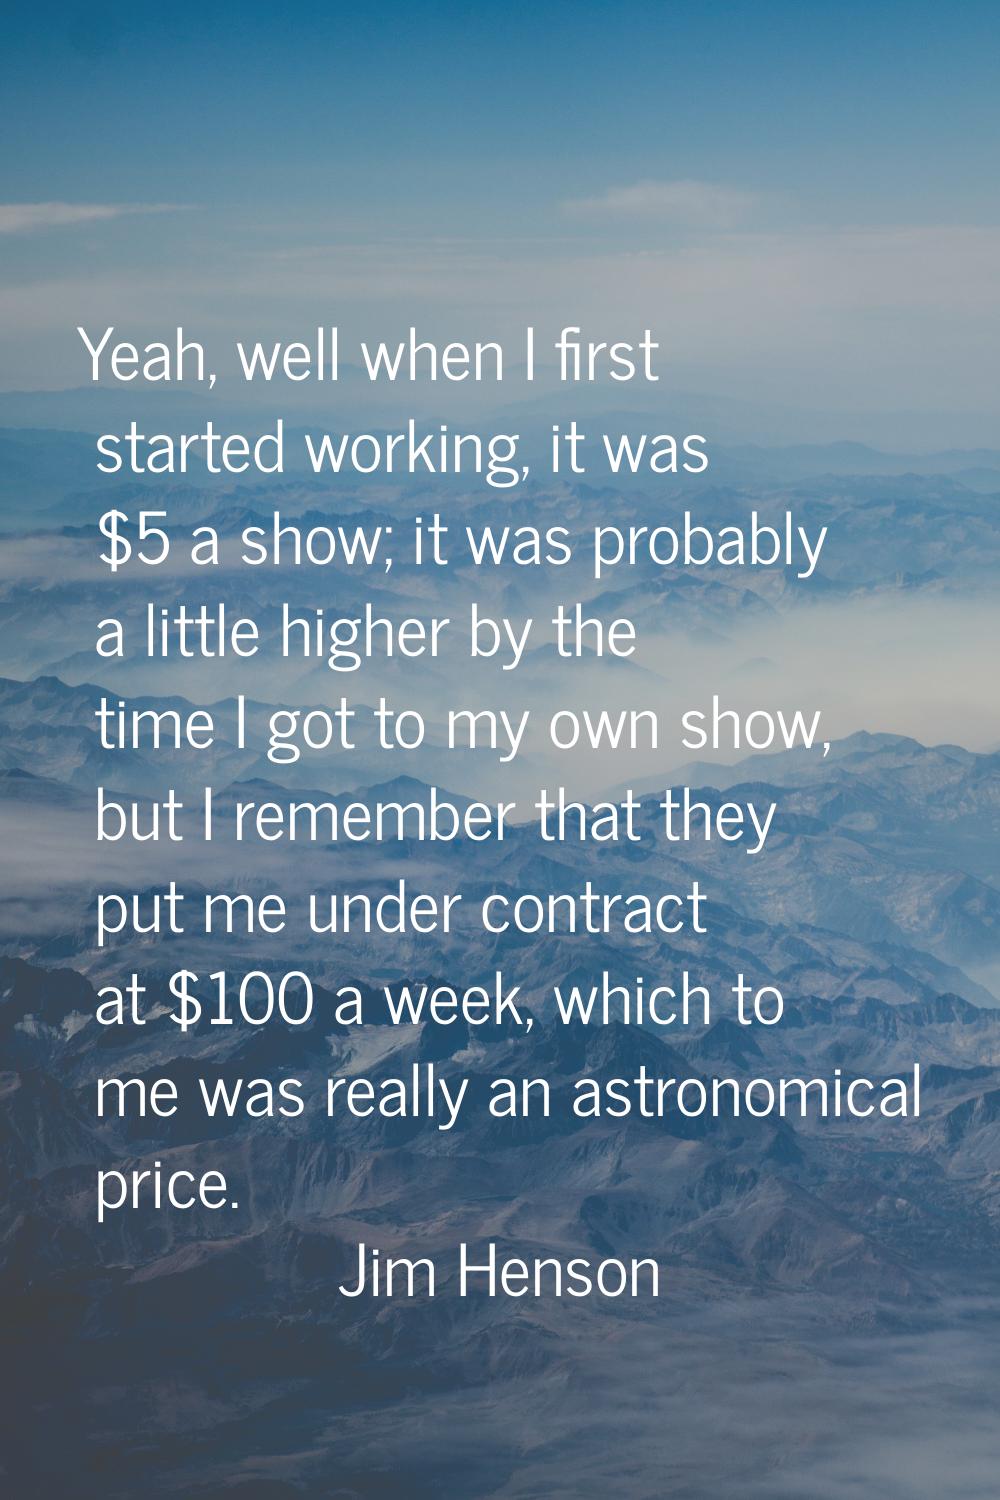 Yeah, well when I first started working, it was $5 a show; it was probably a little higher by the t